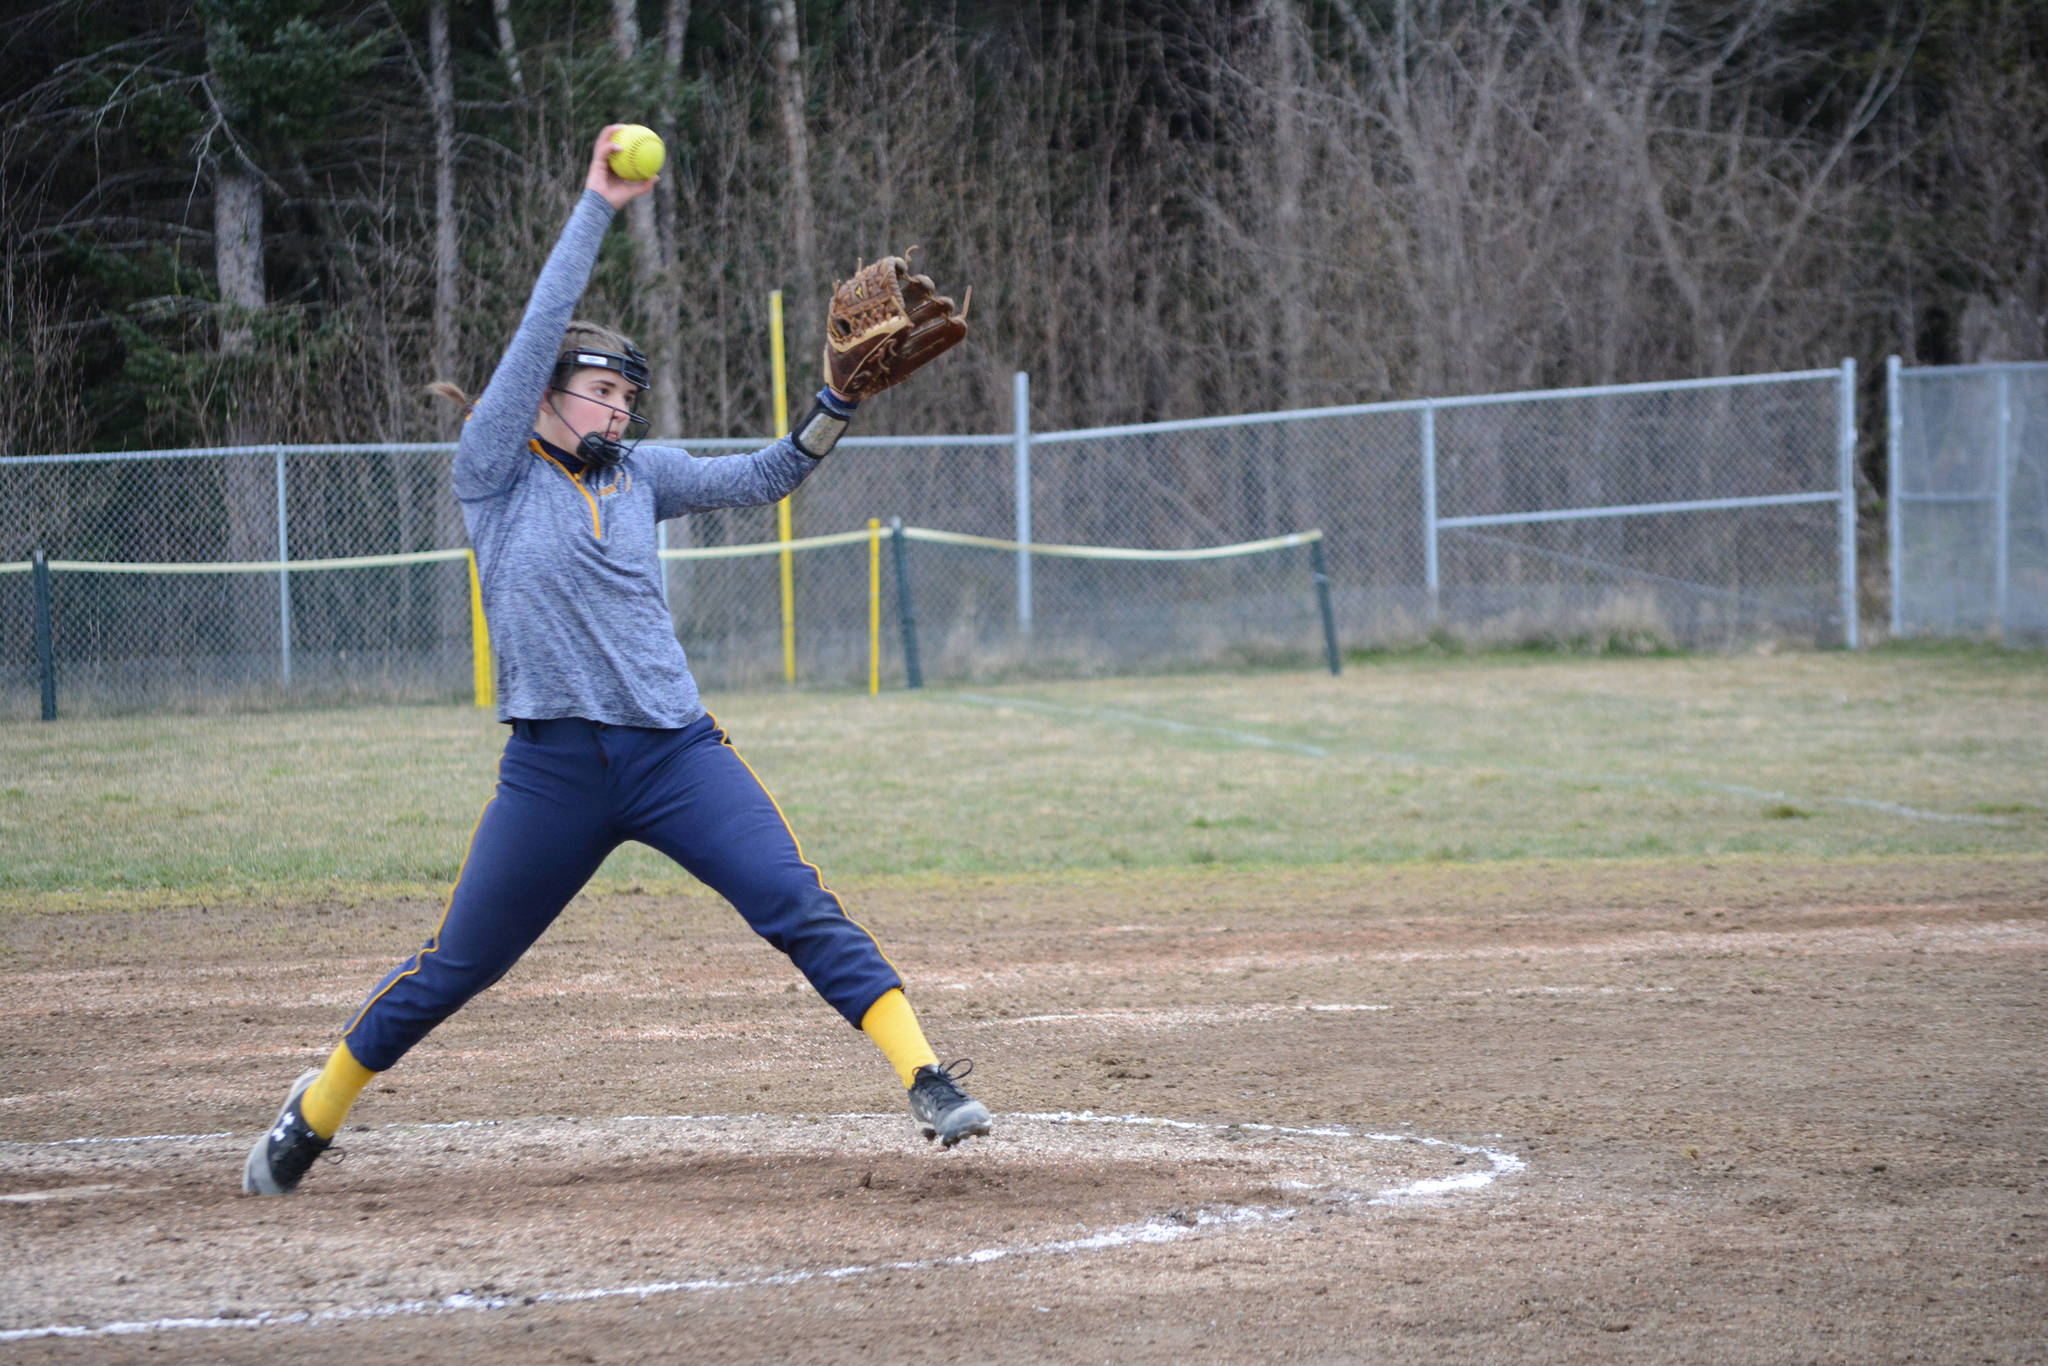 Homer High School Mariners softball pitcher Annalynn Brown winds up for a throw on Tuesday, April 30, 2019, against Soldotna High School at Jack Gist Park in Homer, Alaska. (Photo by Michael Armstrong/Homer News)